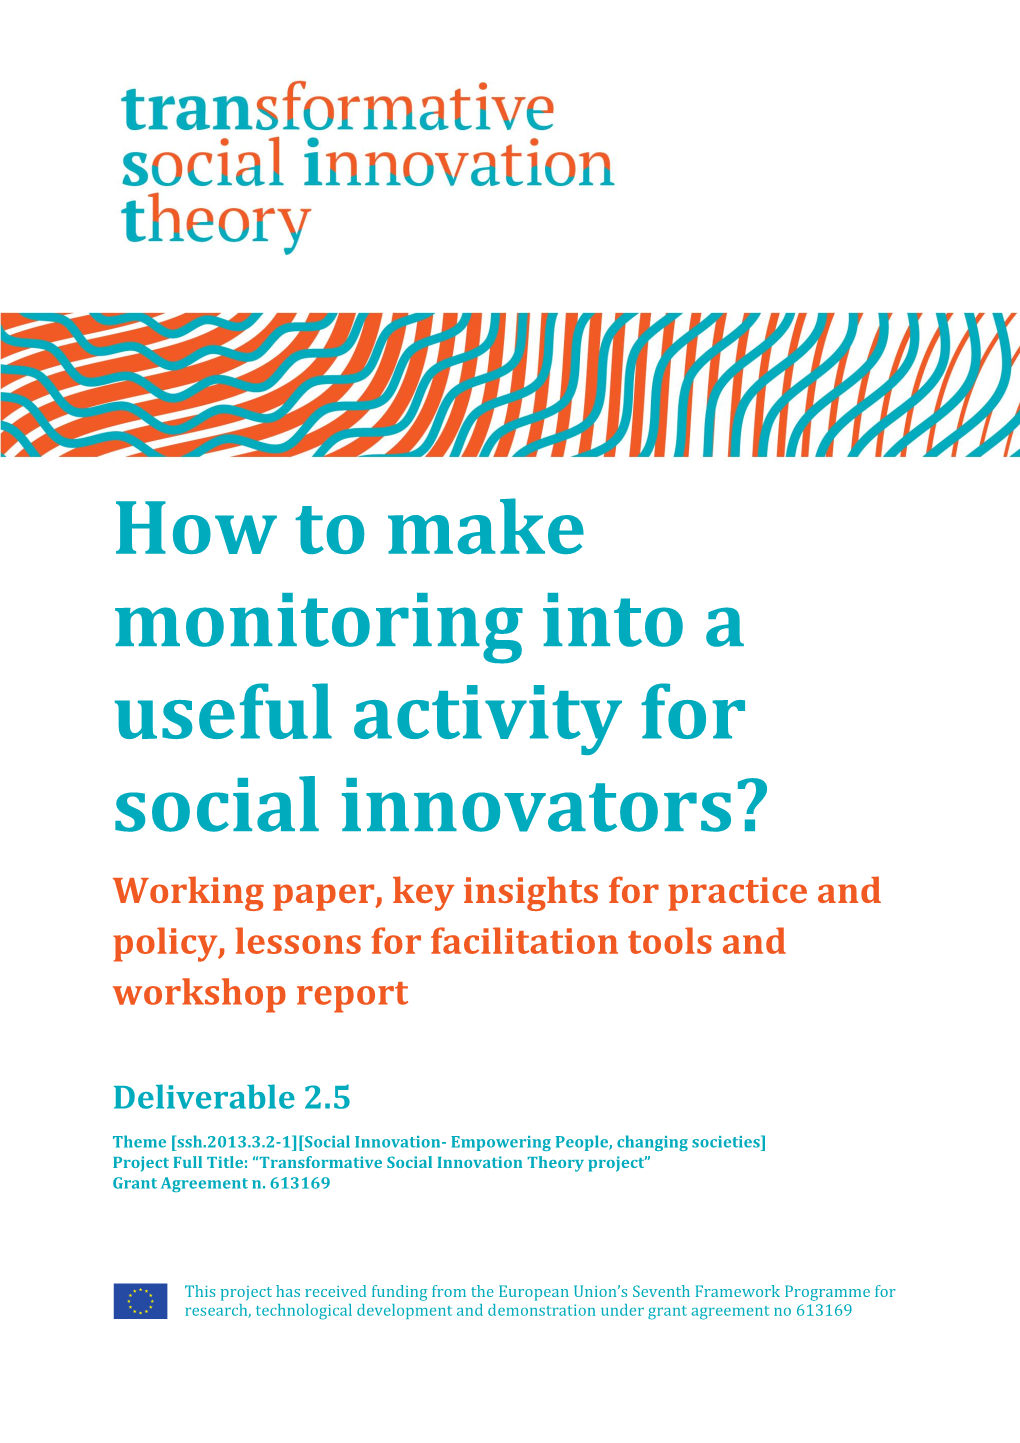 How to Make Monitoring Into a Useful Activity for Social Innovators?